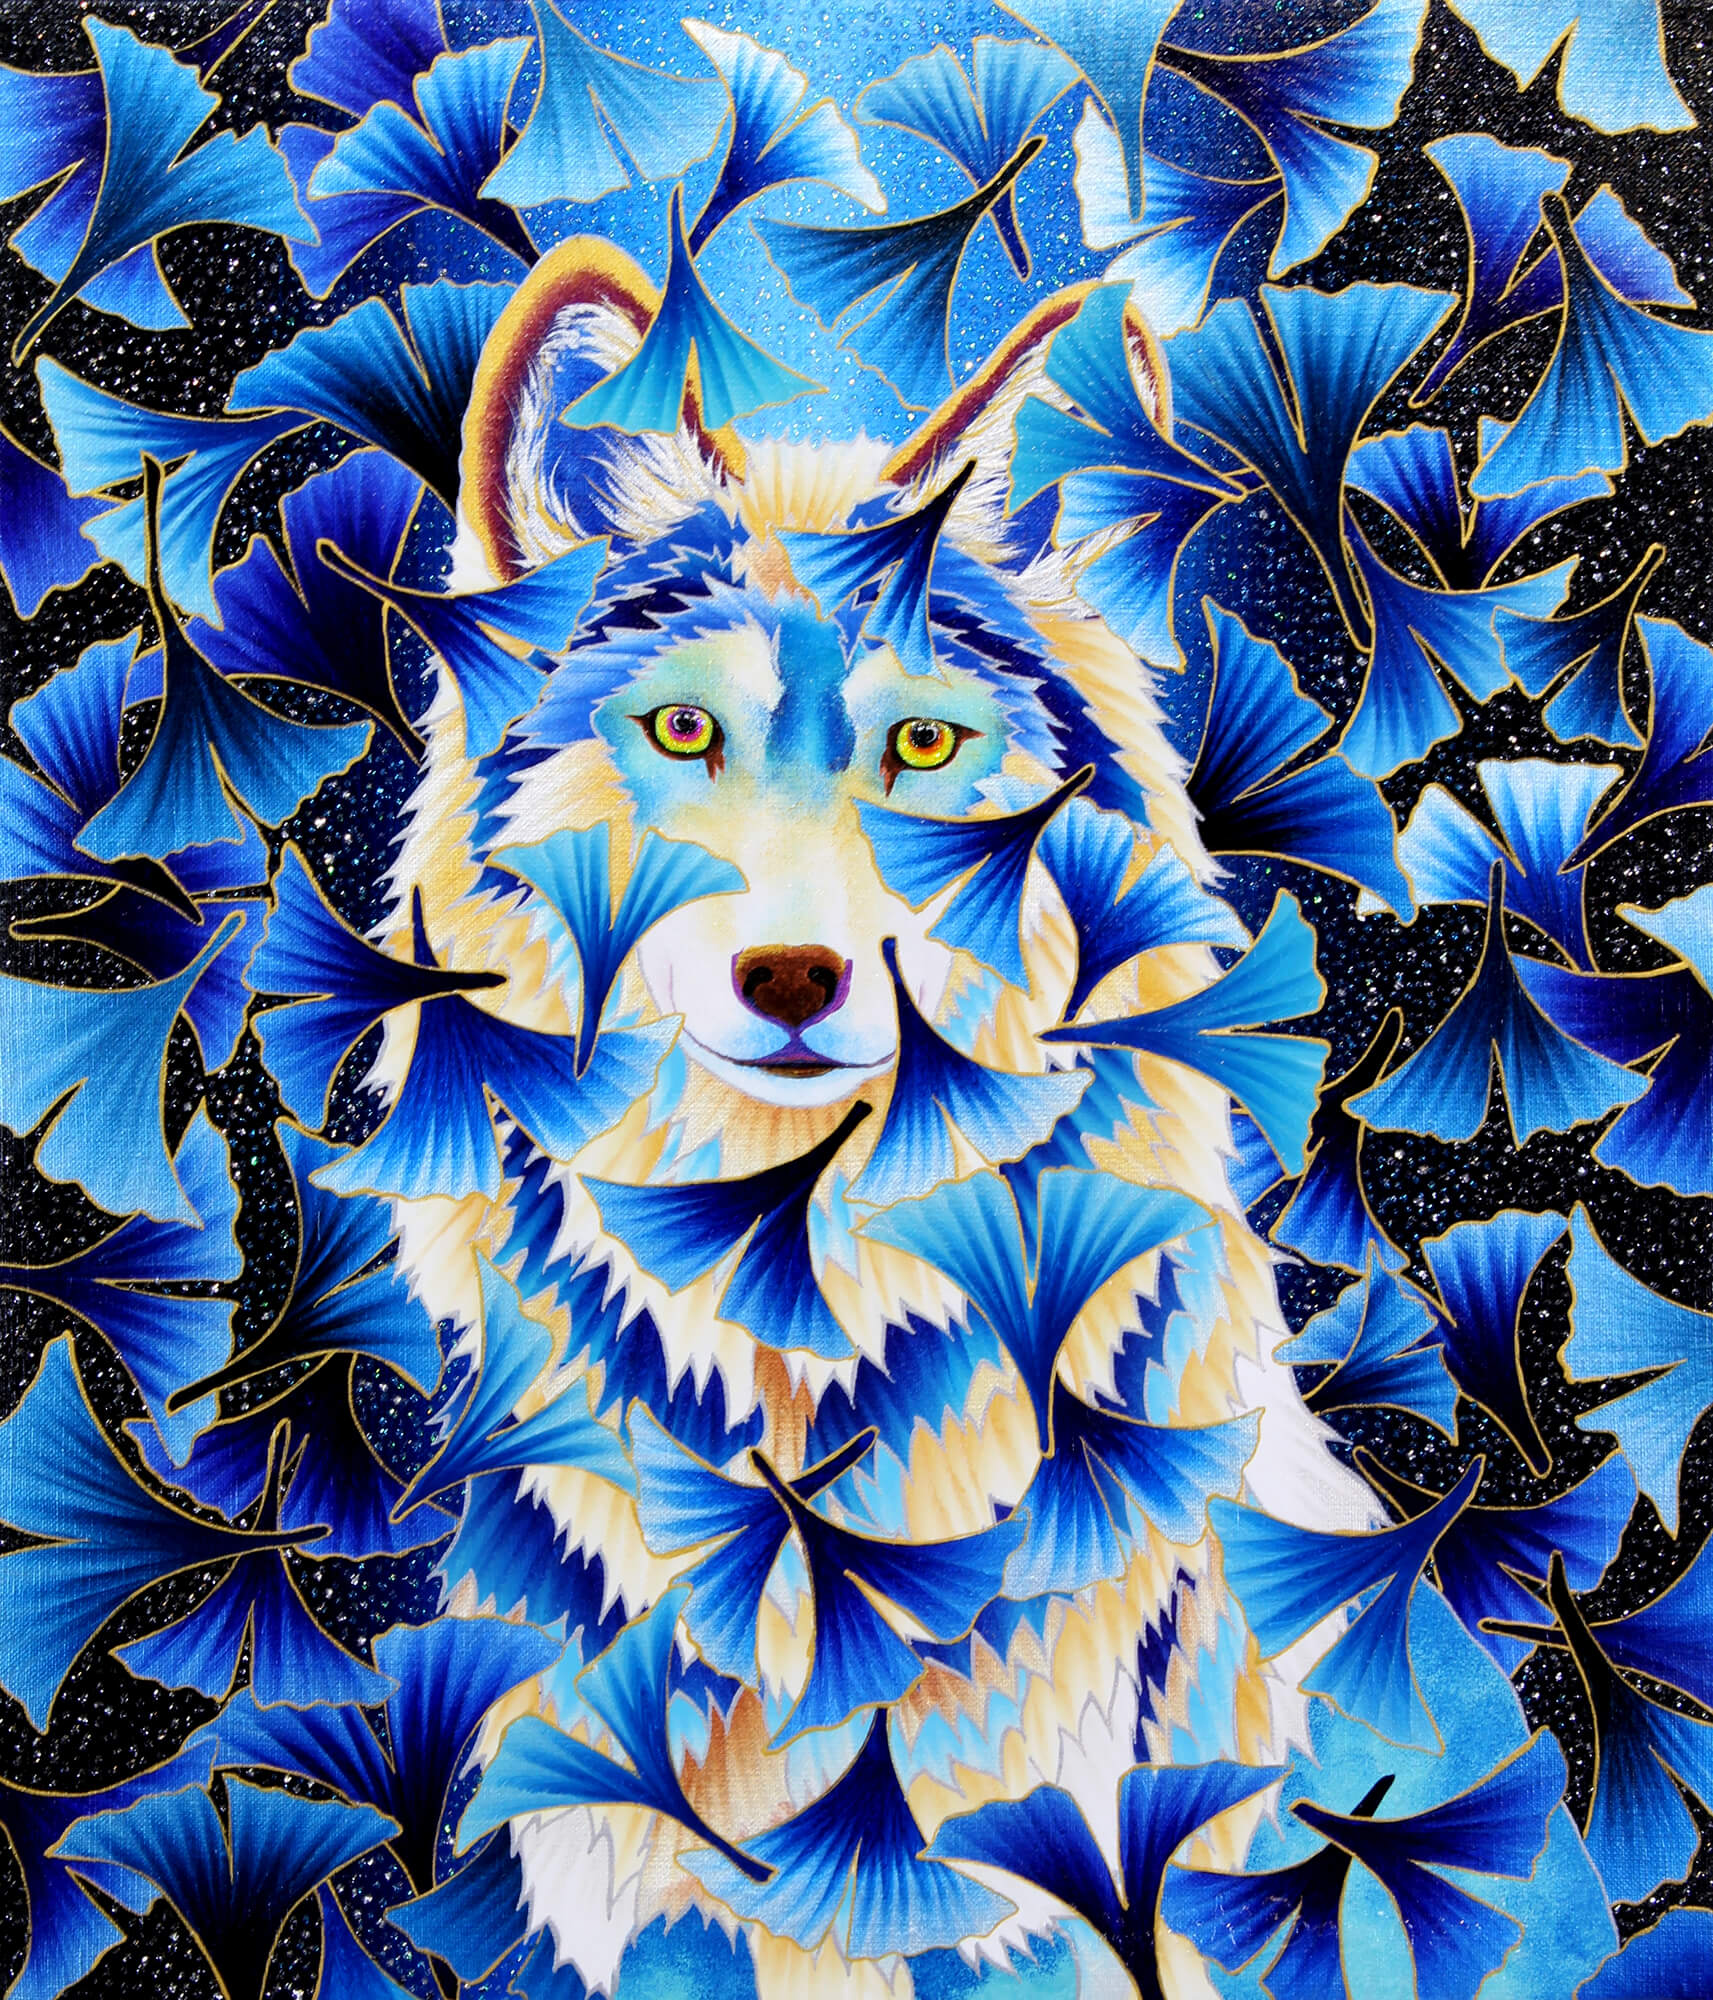 Midnight Blue Wolf改行
Acrylic and glitter on canvas,530×455mm, 2021